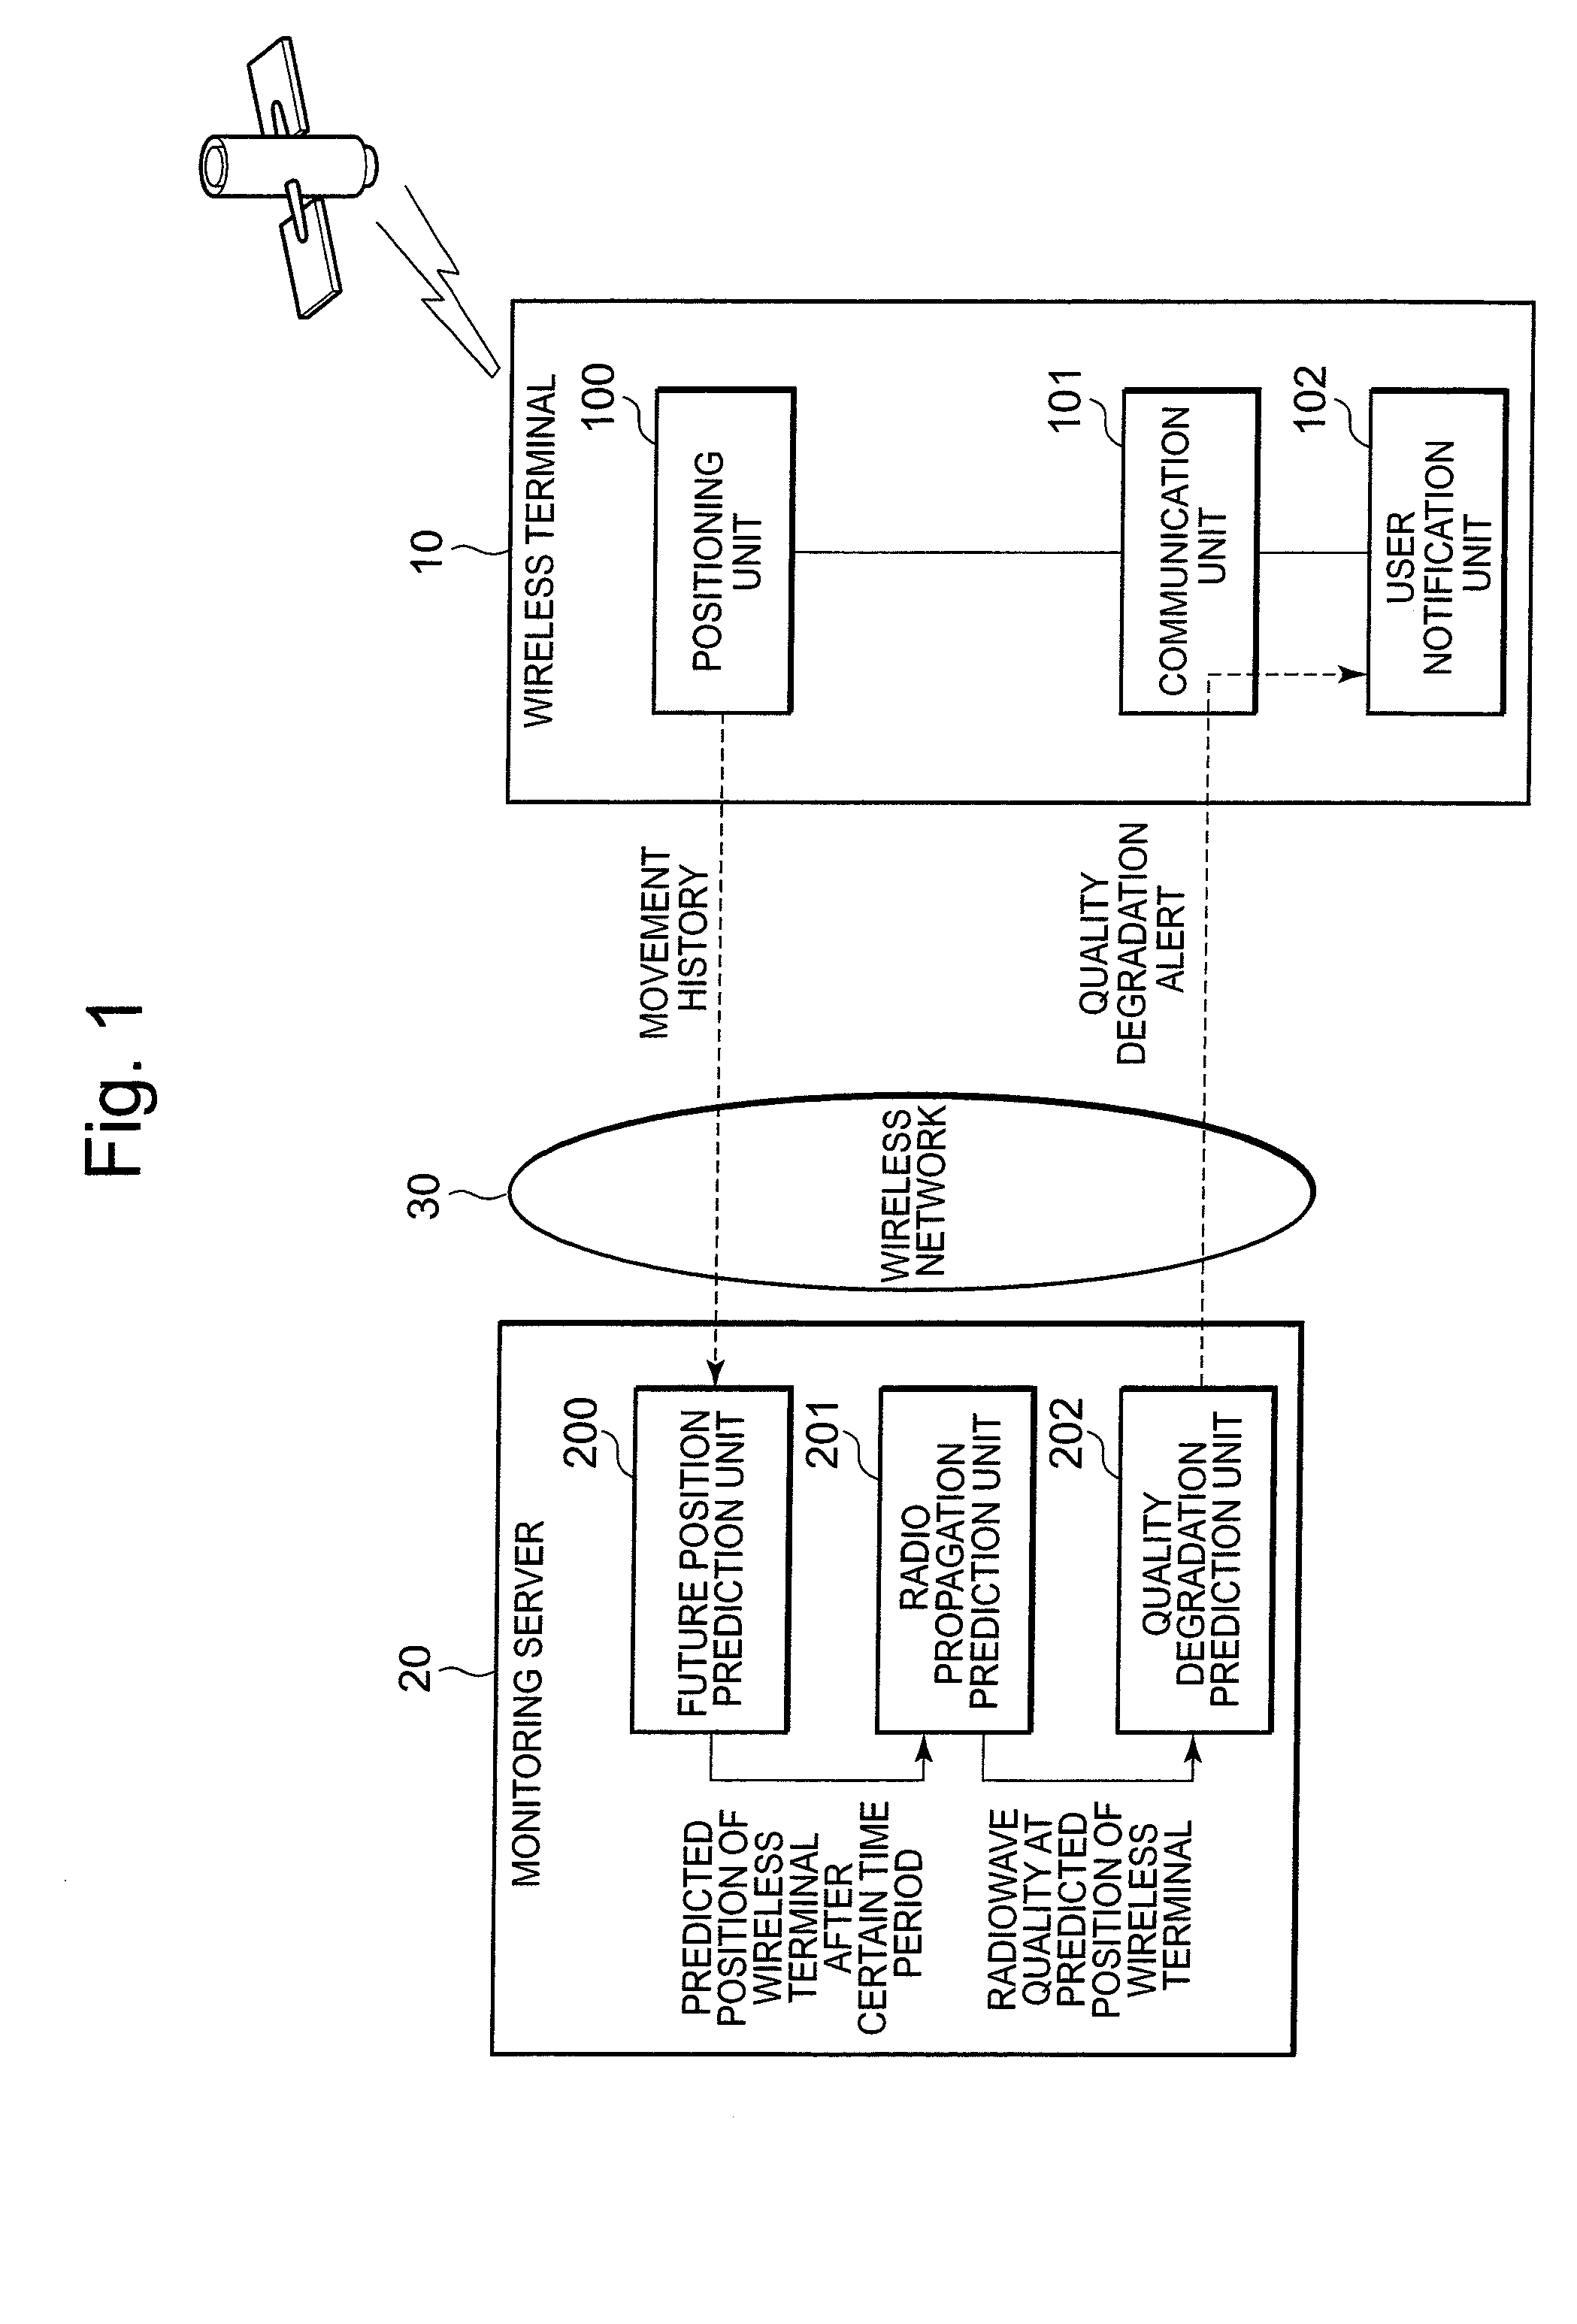 Radio quality degradation prediction system, wireless terminal and monitoring server therefor, radio quality degradation prediction method and program